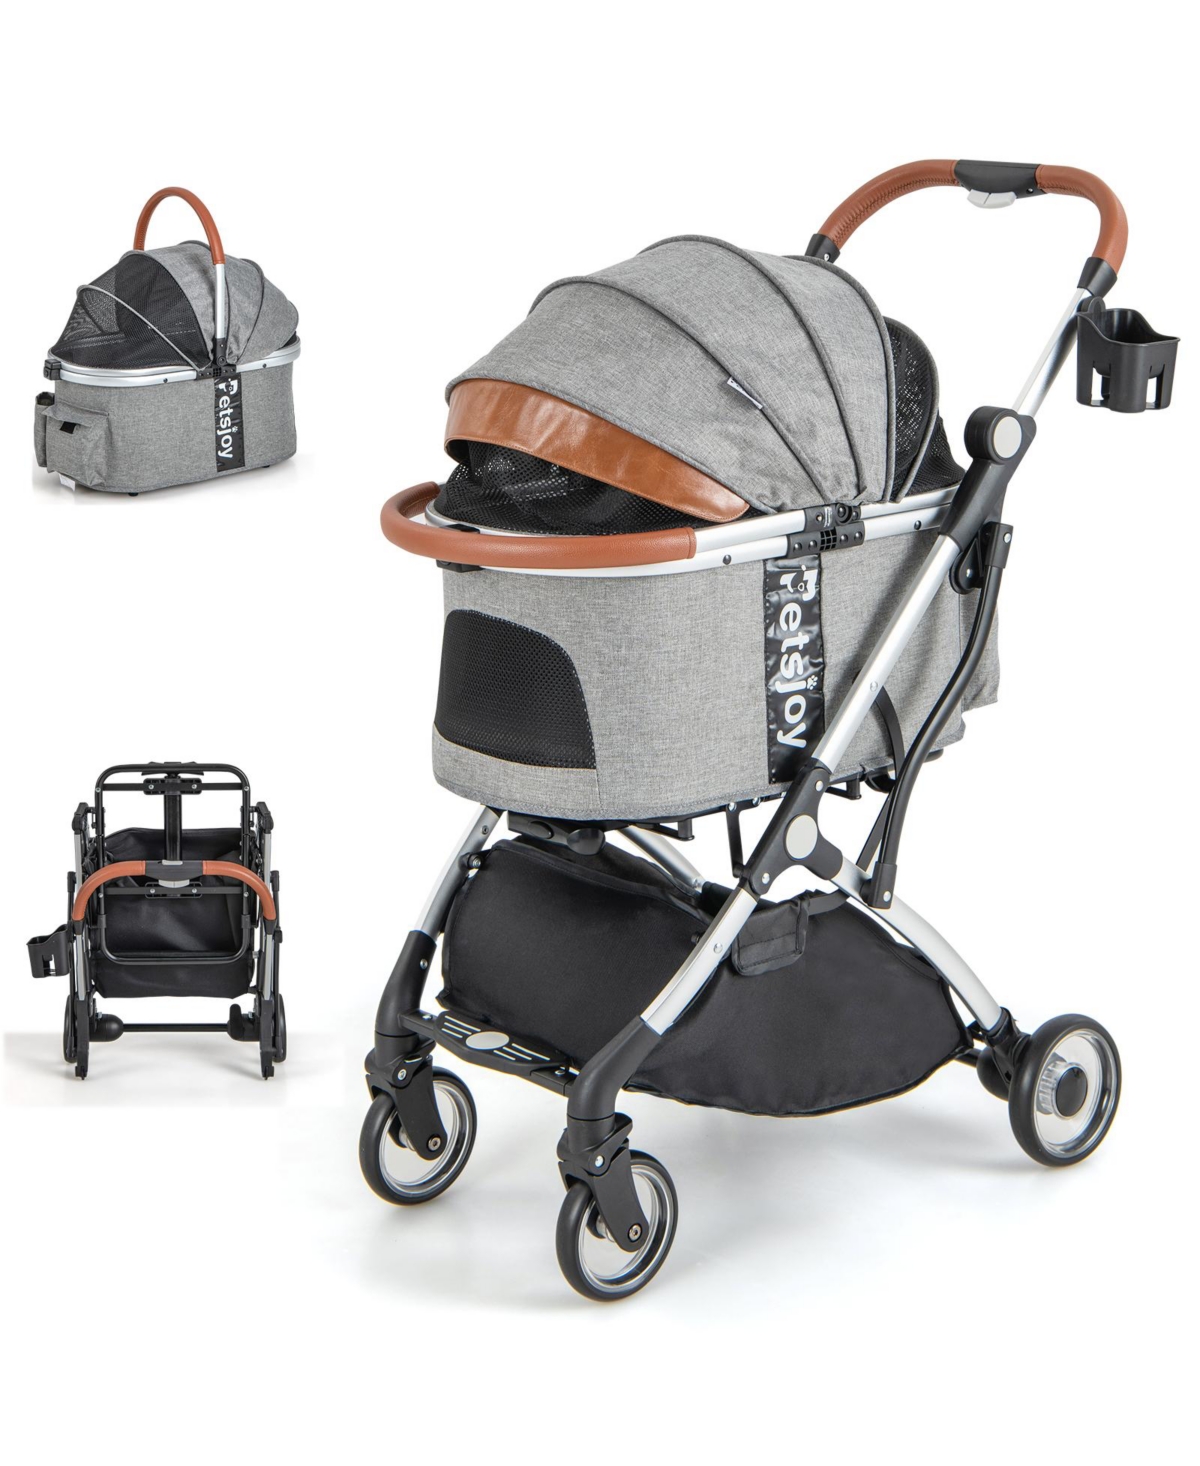 Foldable Dog Cat Stroller with Removable Waterproof Cover - Grey